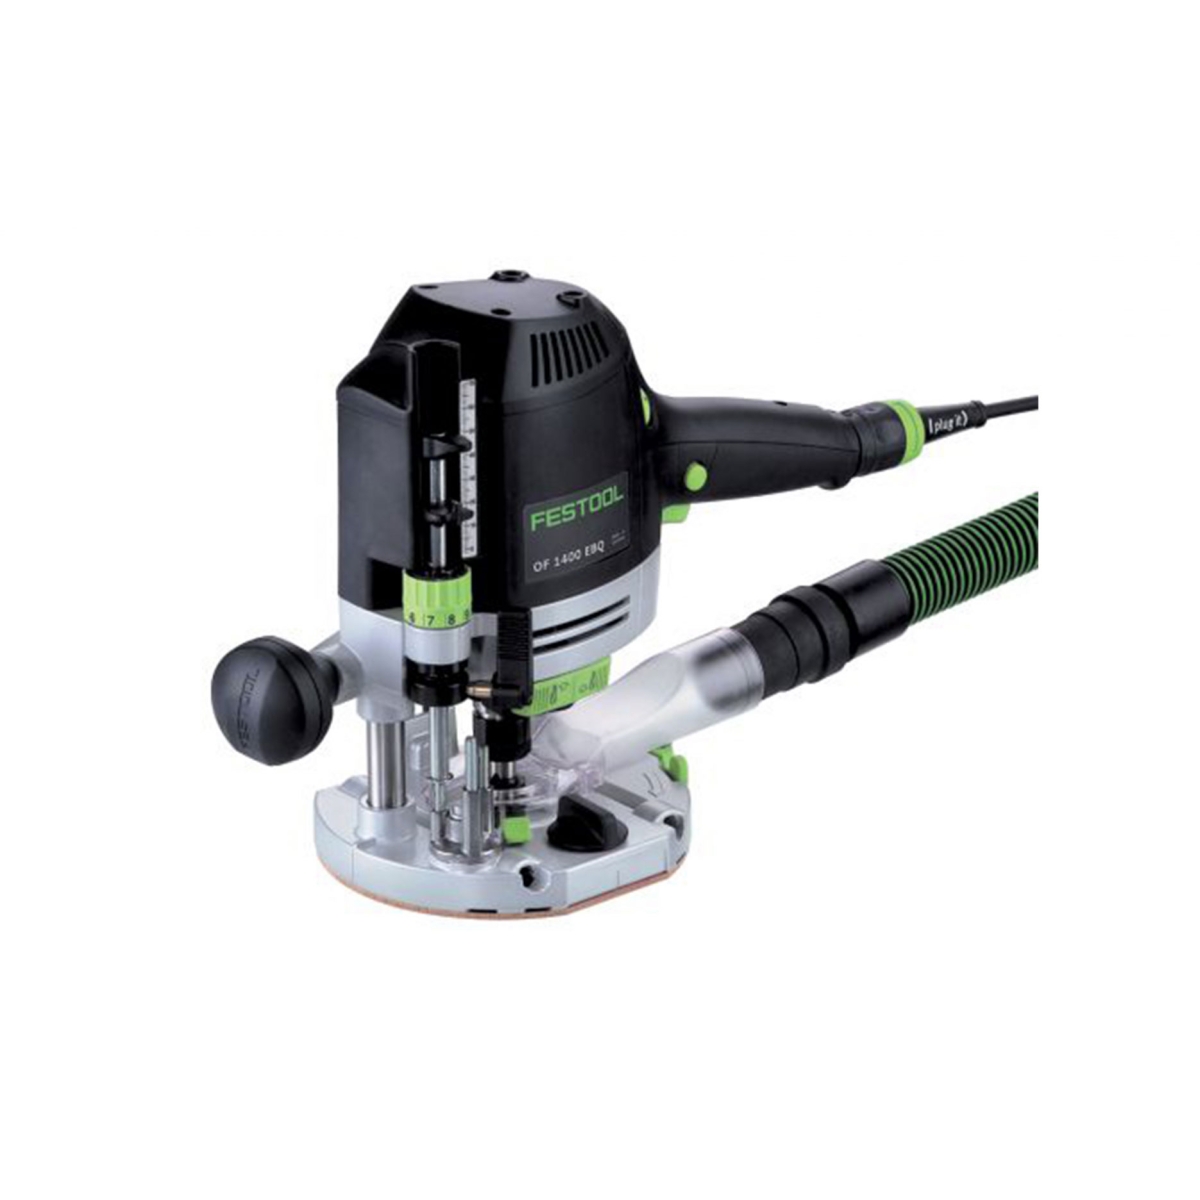 Festool OF 1400 W Plunge Router